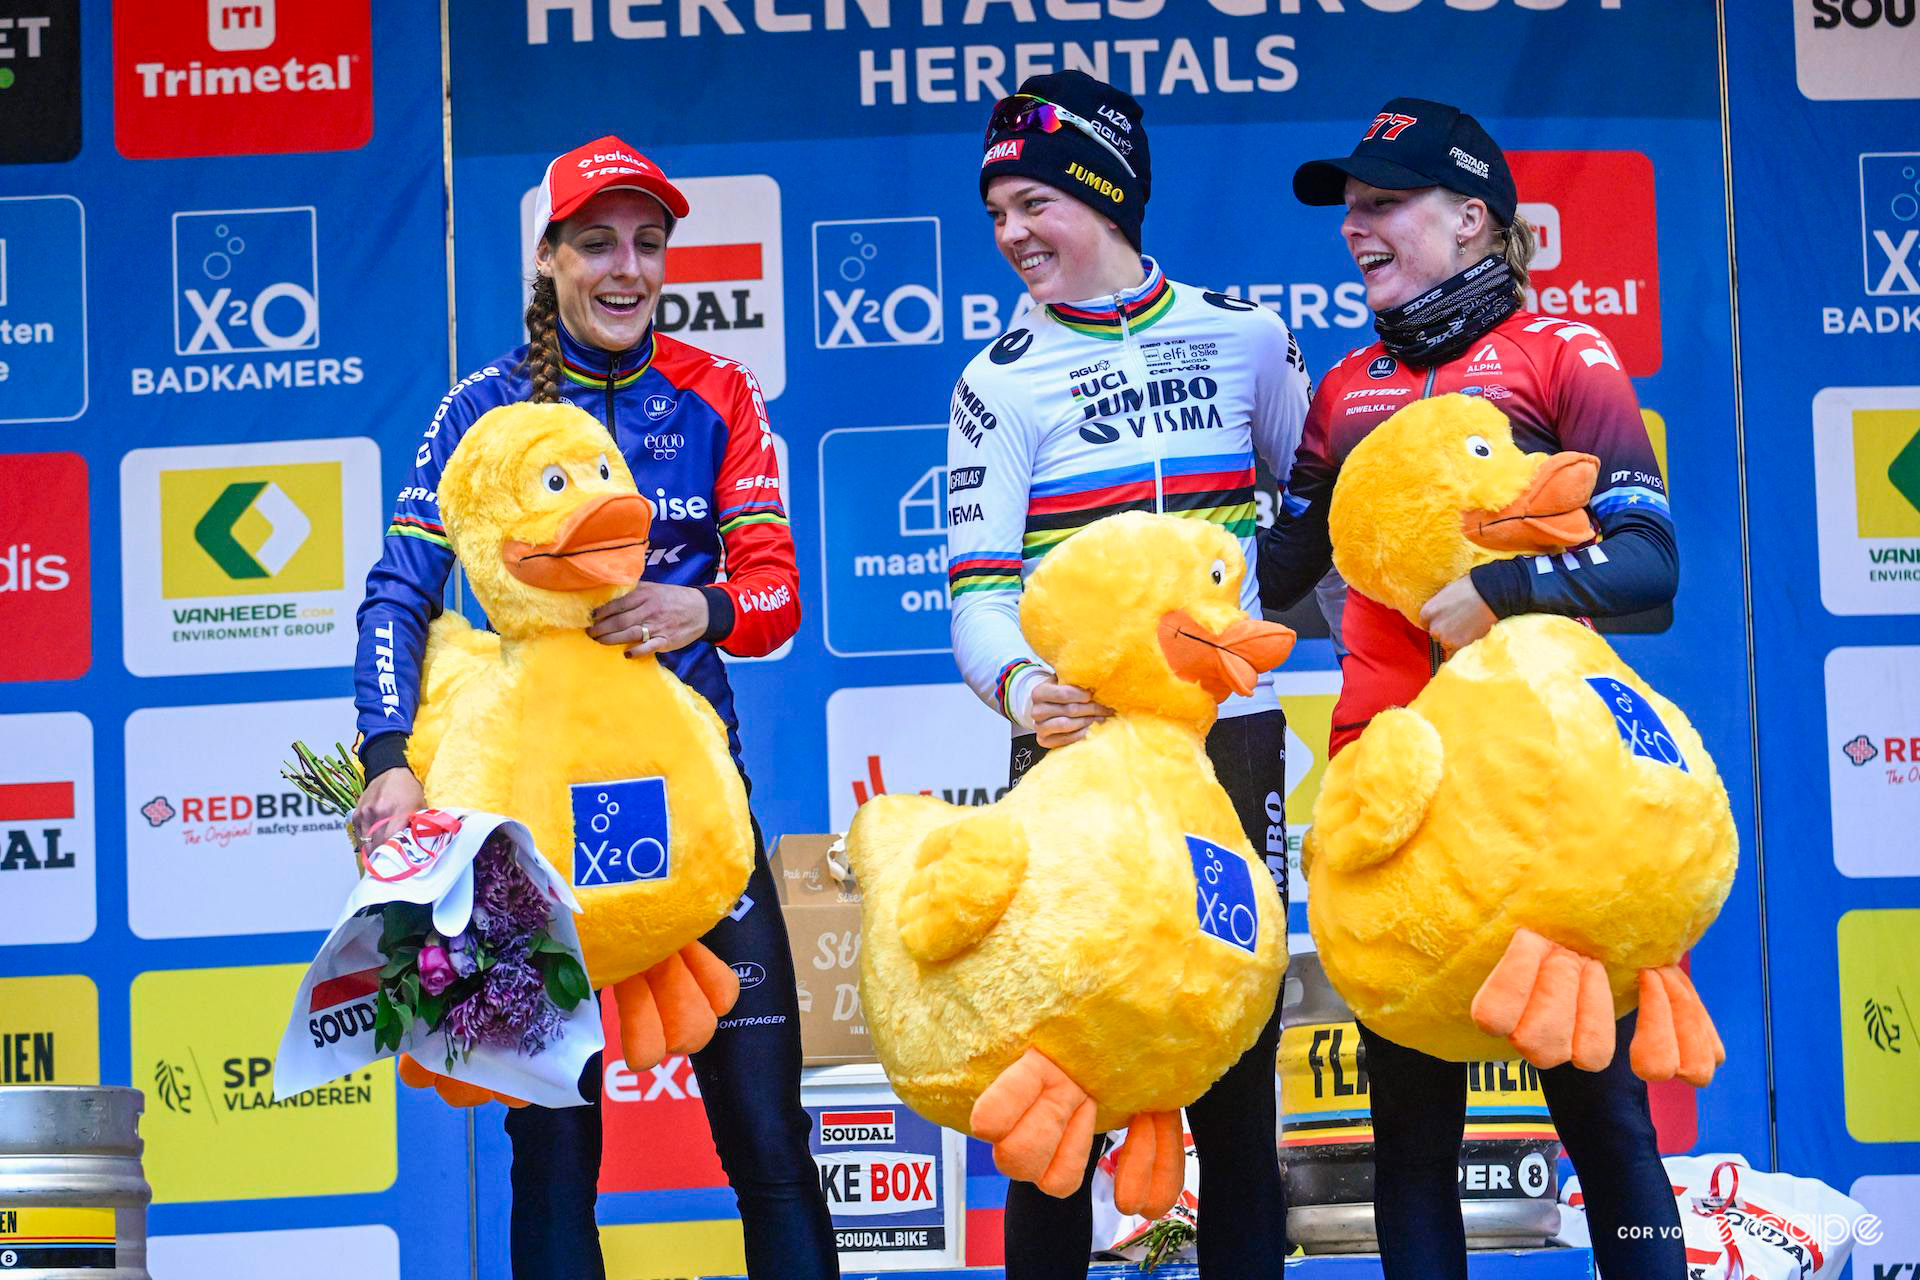 The elite women's podium of winner Fem van Empel, runner-up Lucinda Brand and third-place Annemarie Worst at X2O Trofee Herentals with their large X2O duck mascots.